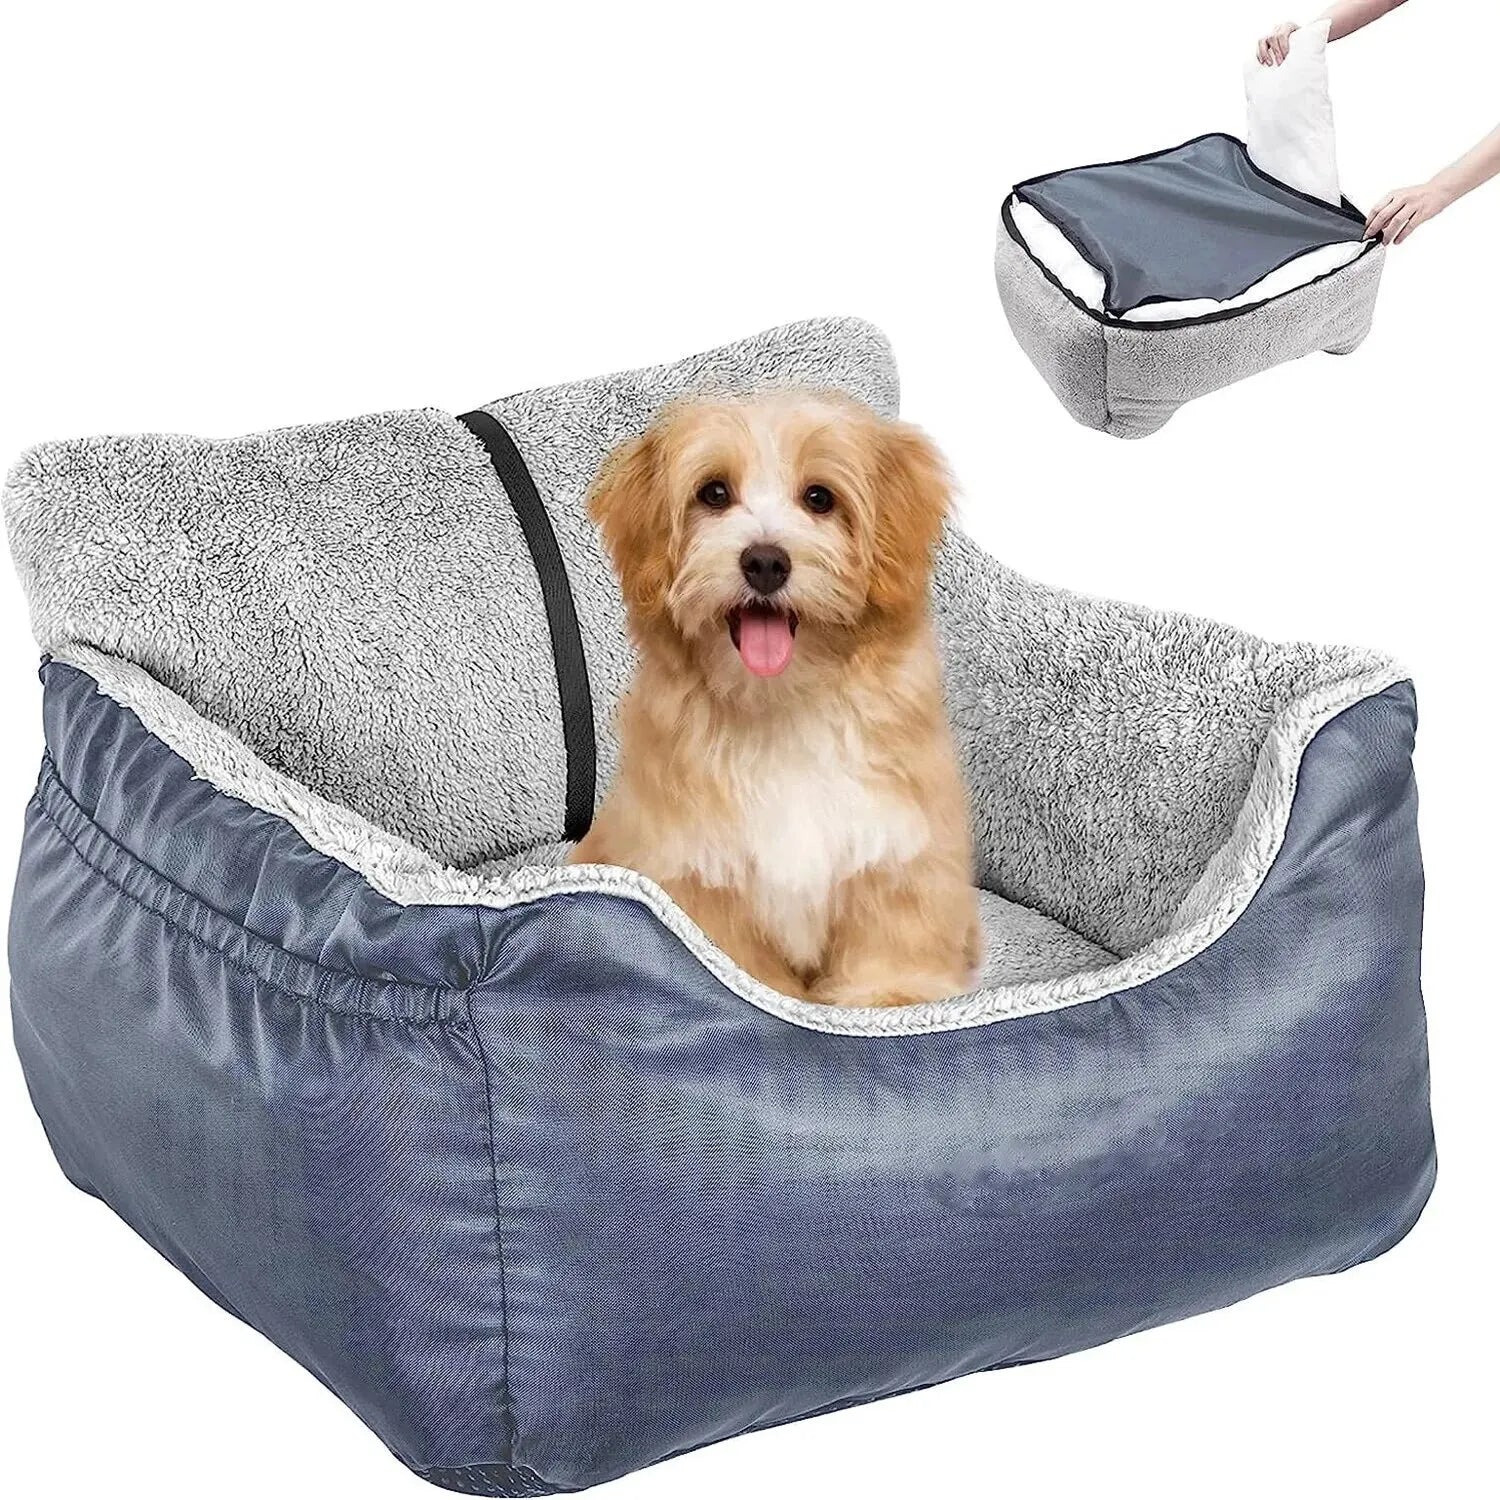 Dog Booster Car Seat: Sturdy Washable Detachable Bed & Carrier  ourlum.com   